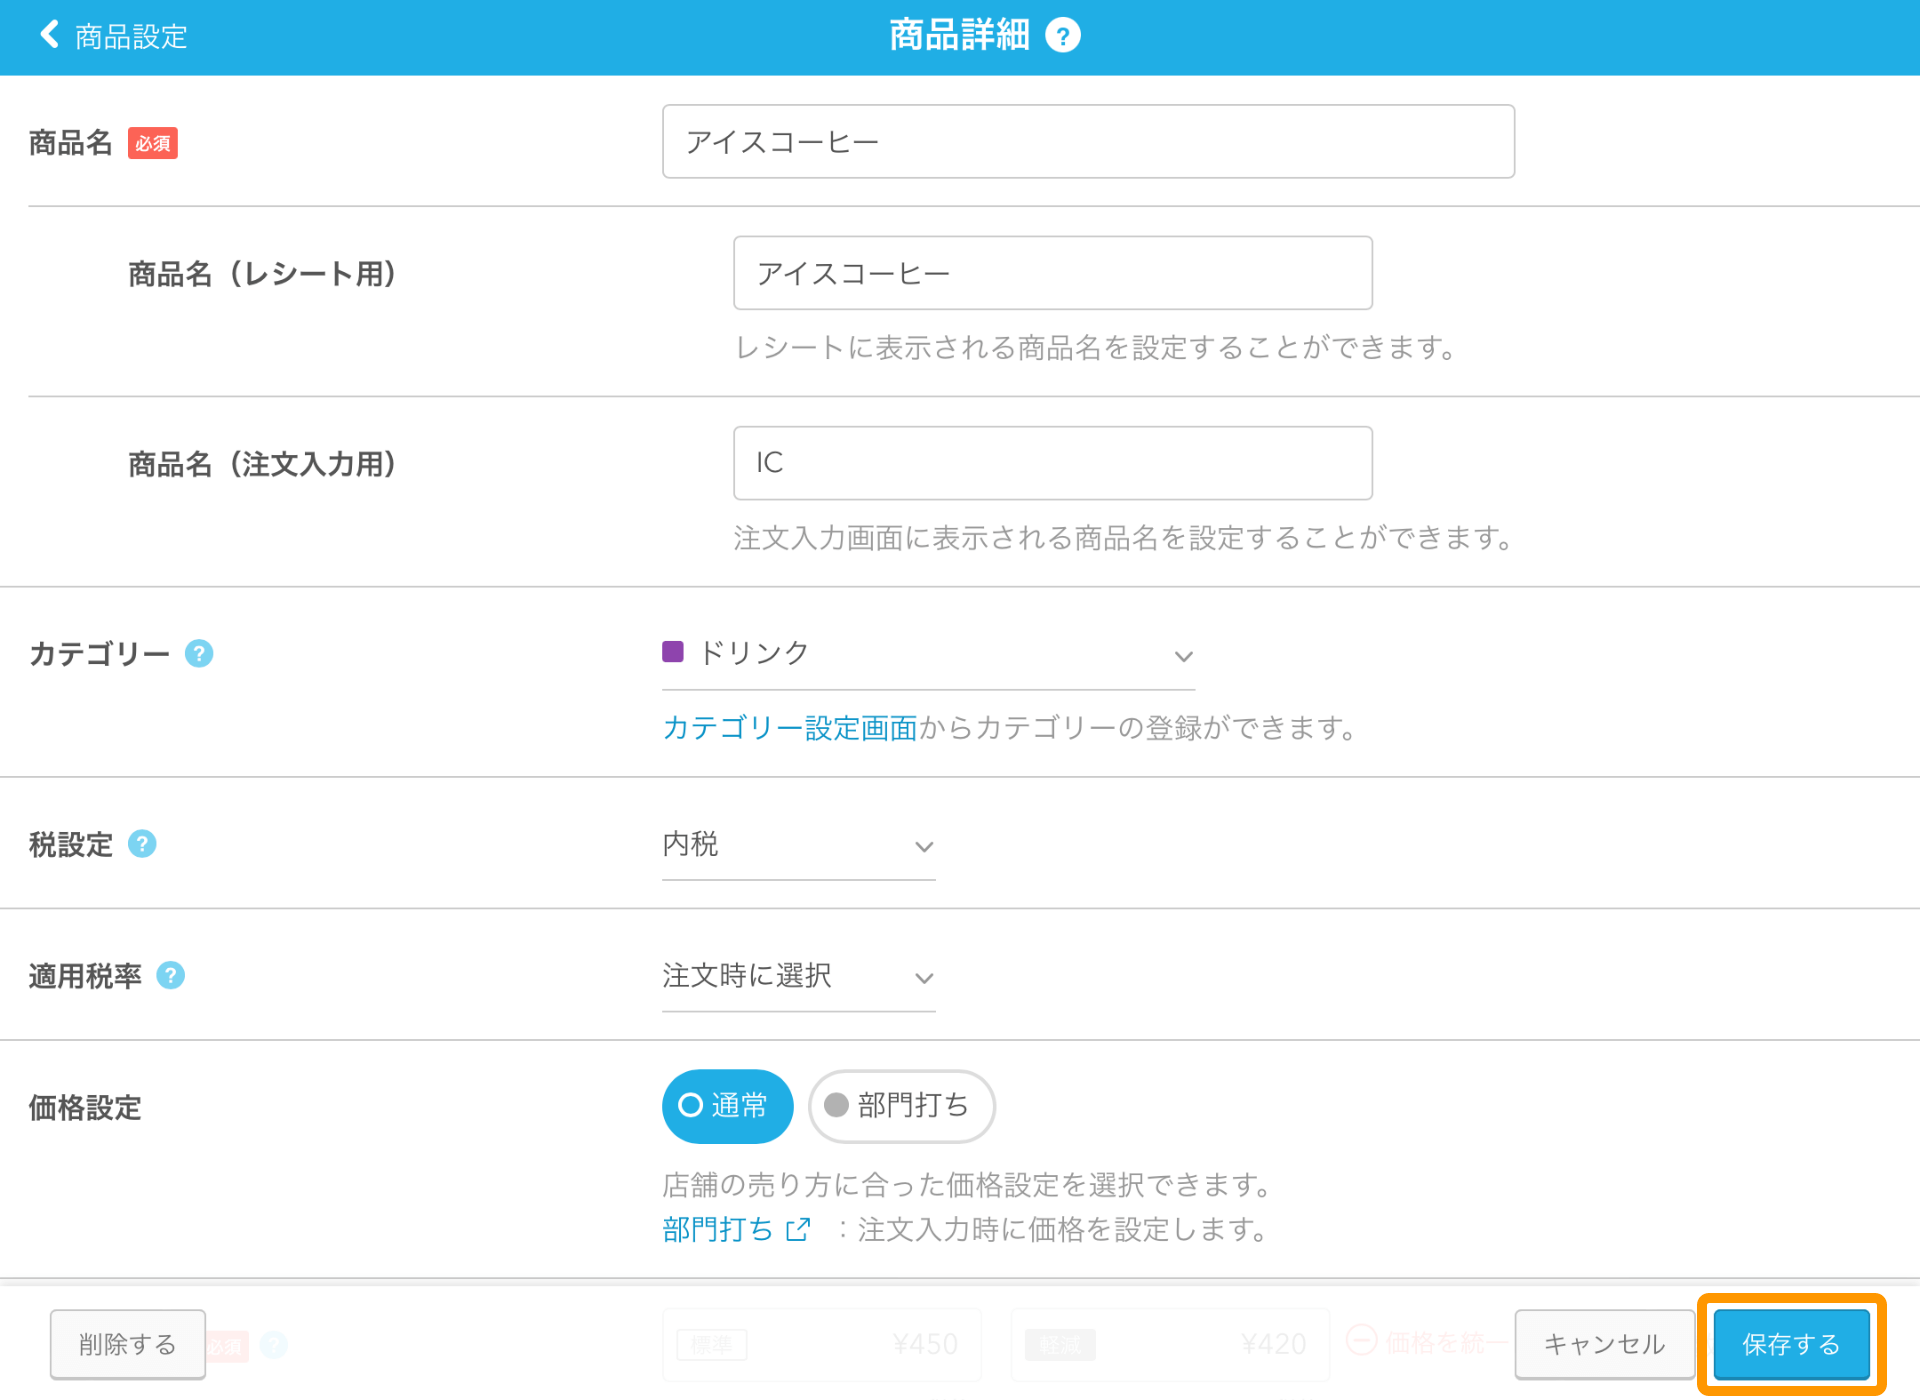 Airレジ 商品詳細画面 arg_900005748126_02.png